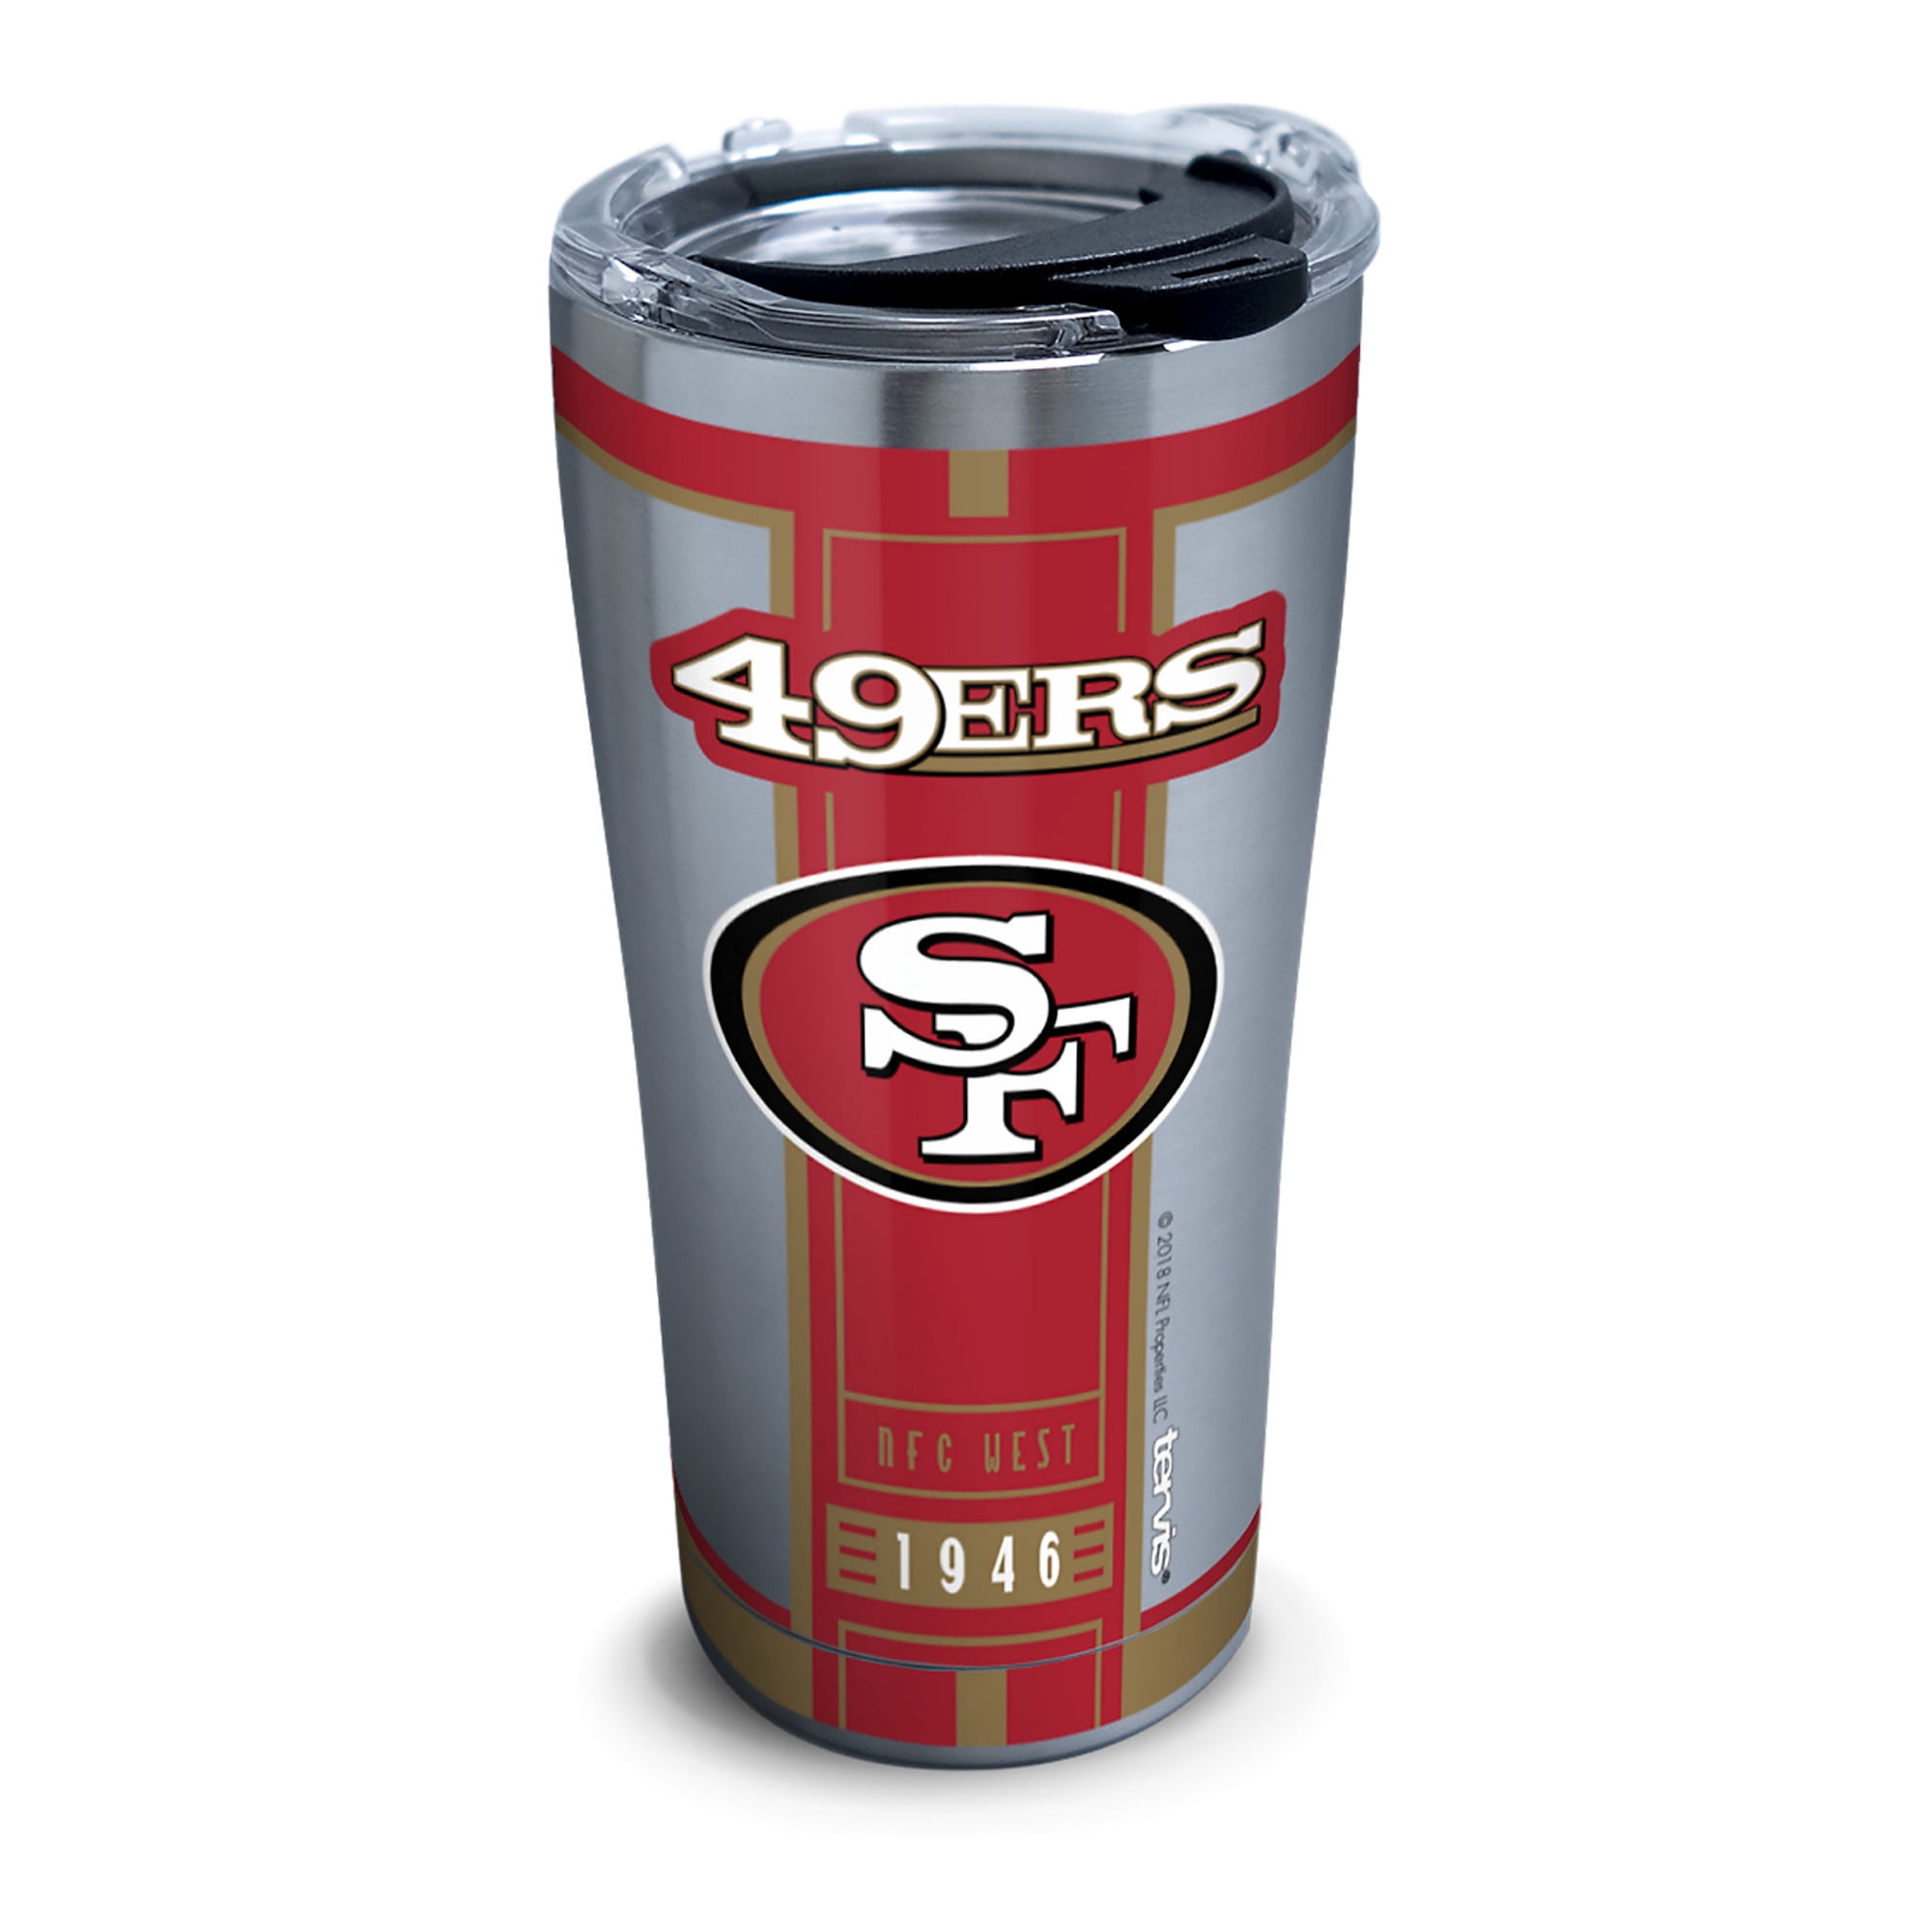 Other, Sf 49ers Tumbler